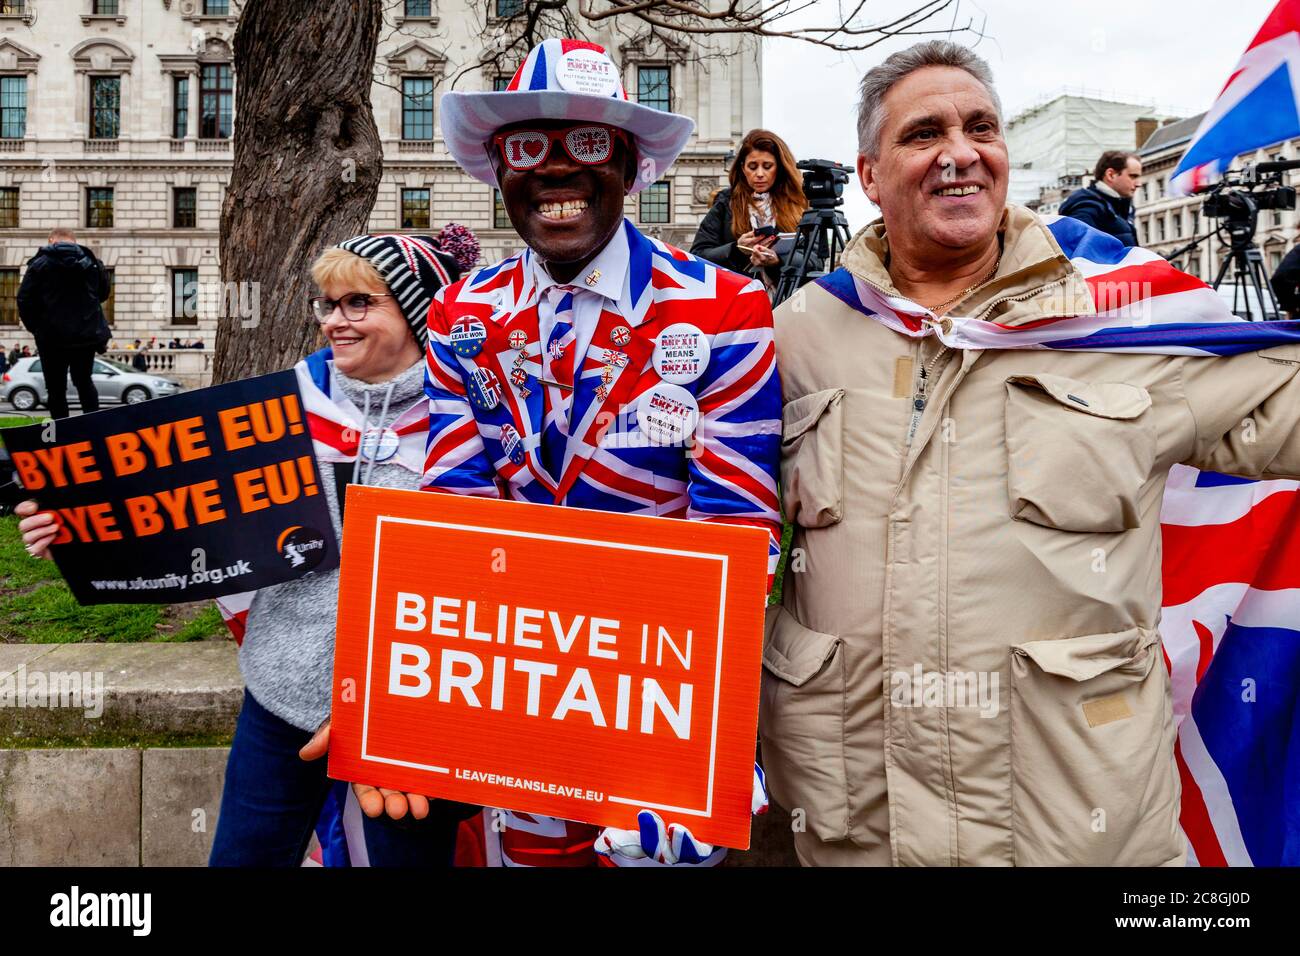 Brexit supporters gather in Parliament Square ahead of Great Britain leaving the European Union later that day at 11pm , London, UK. Stock Photo